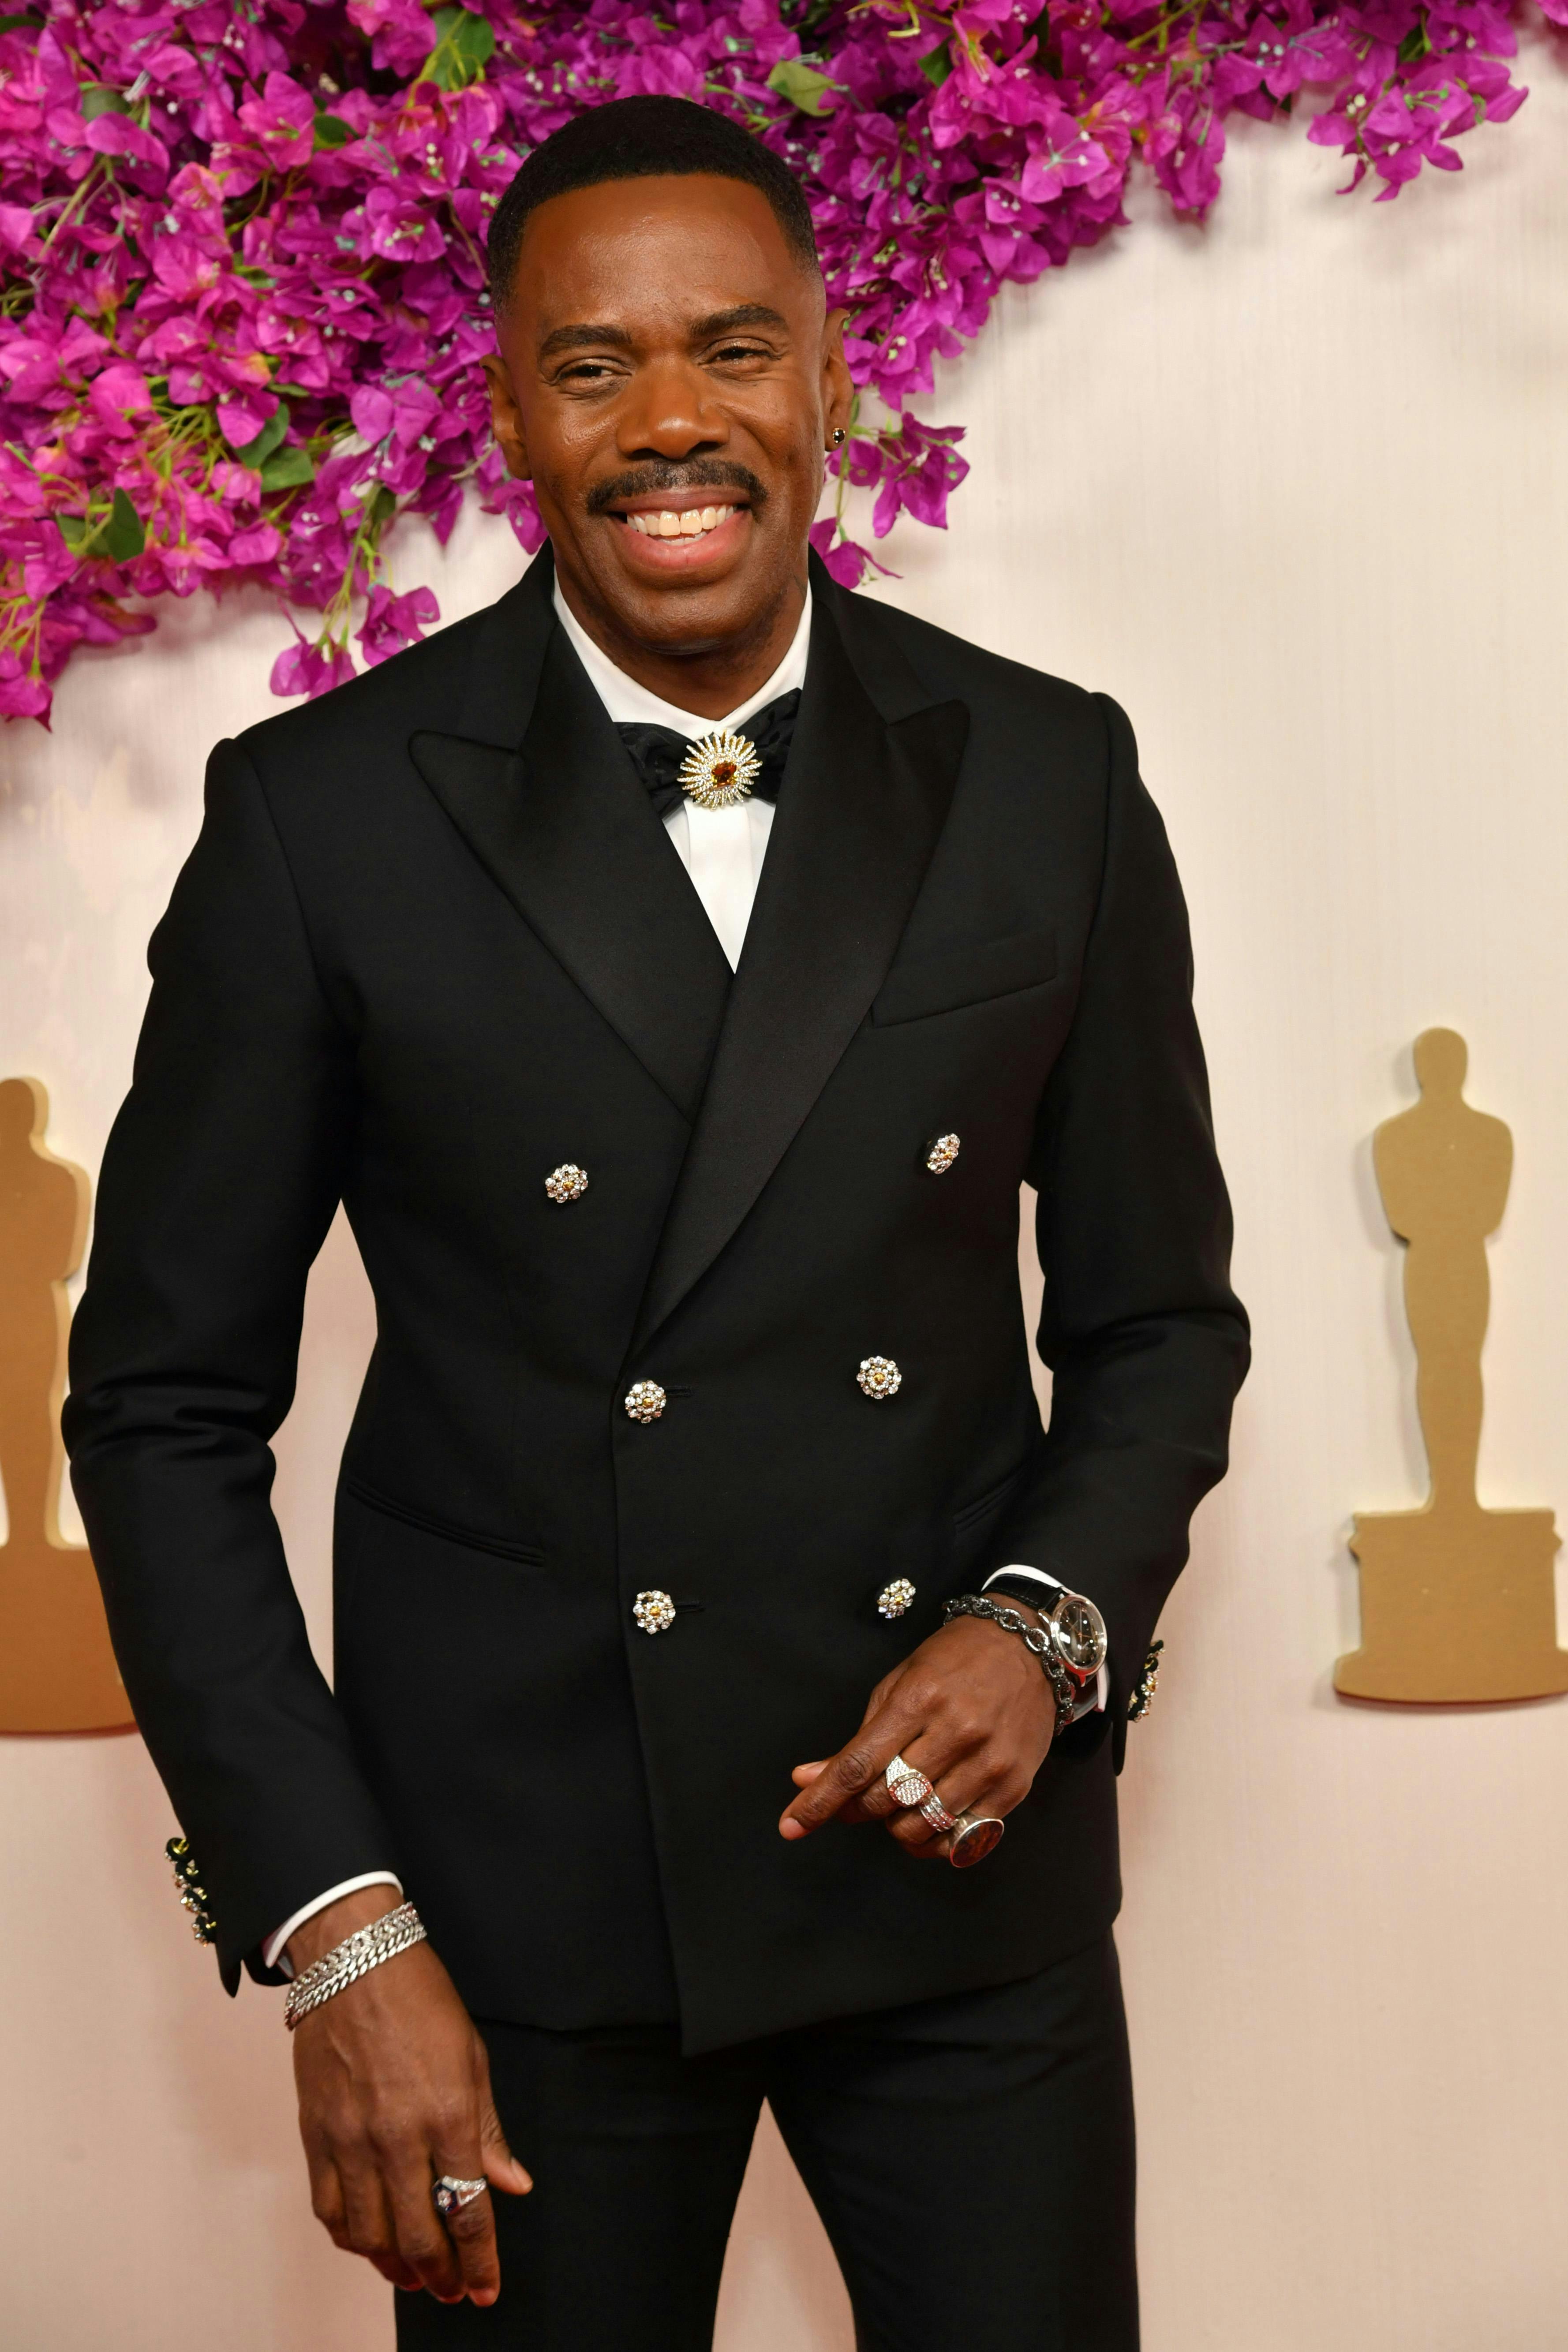 Colman Domingo. Courtesy of Getty Images.